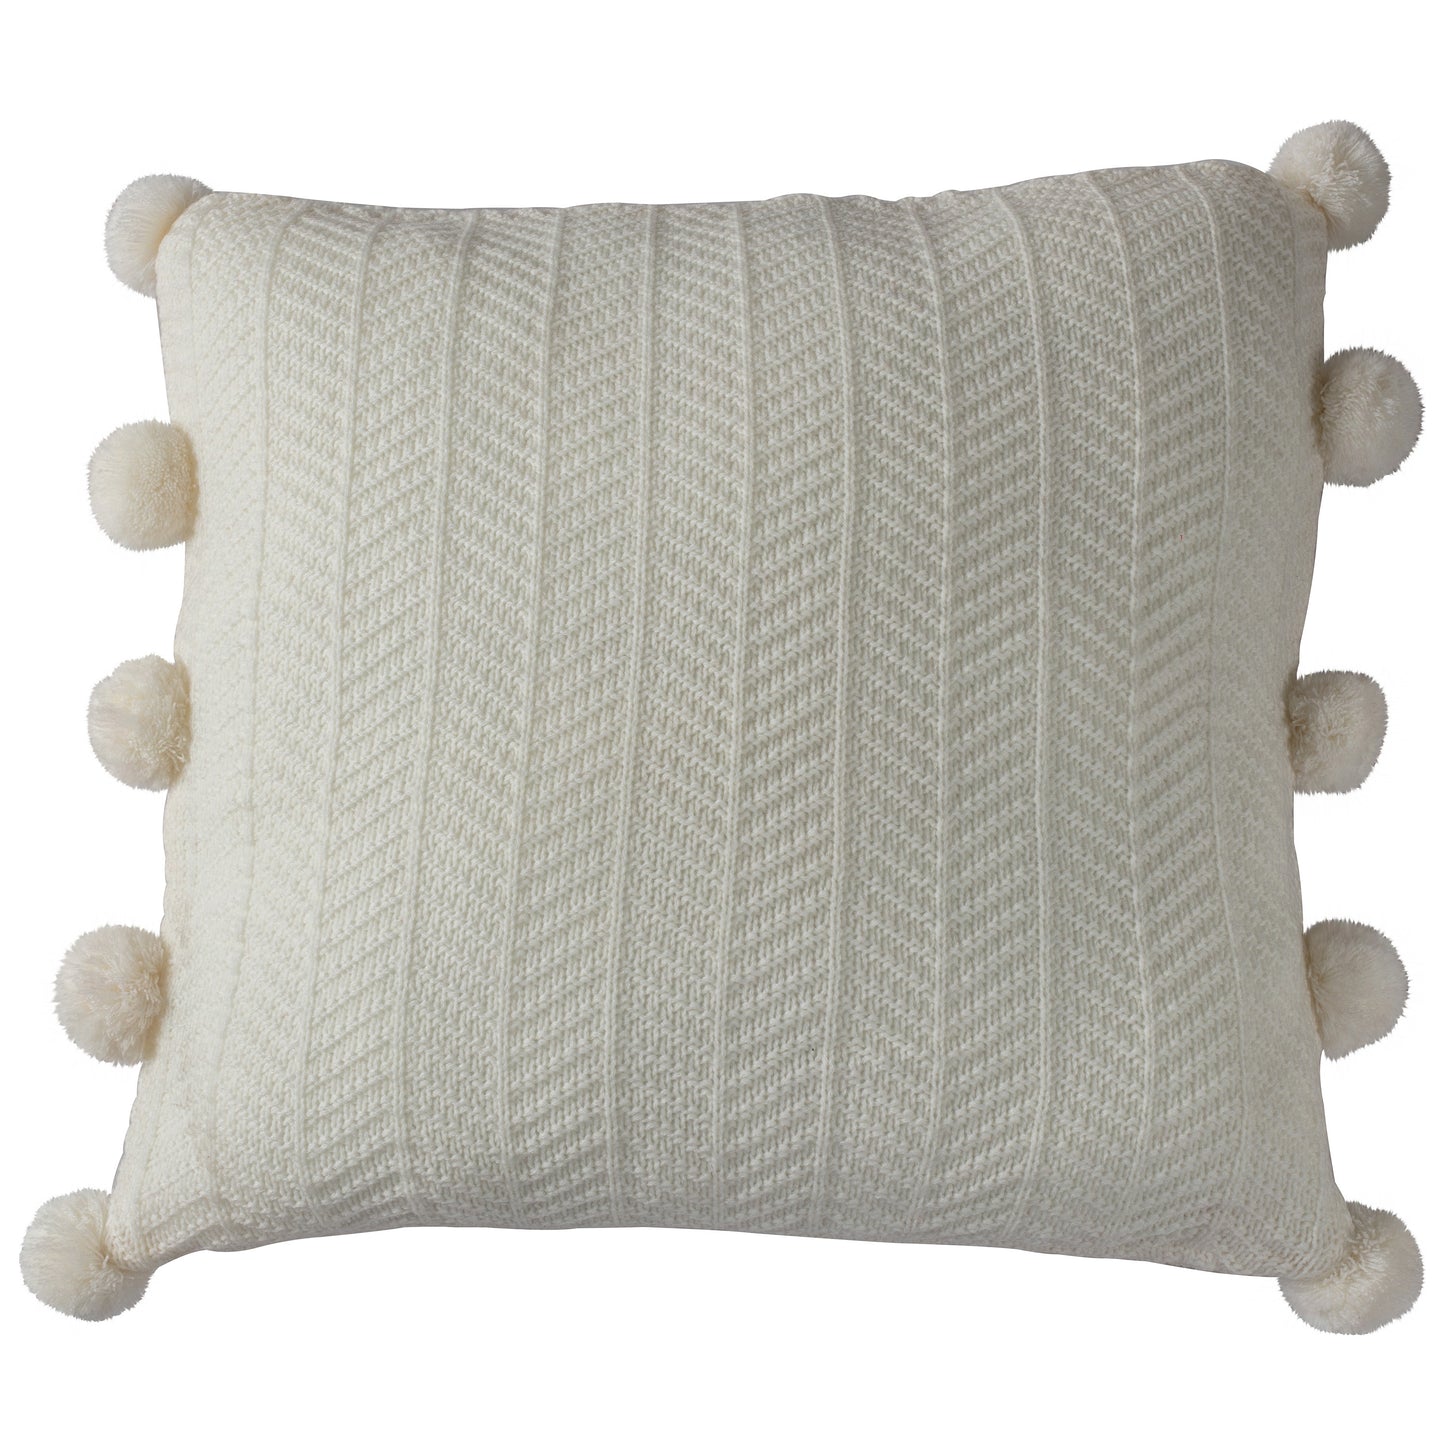 A Herringbone Pom Pom Cushion Cream 450x450mm by Kikiathome.co.uk that adds a touch of interior decor to your home furniture.